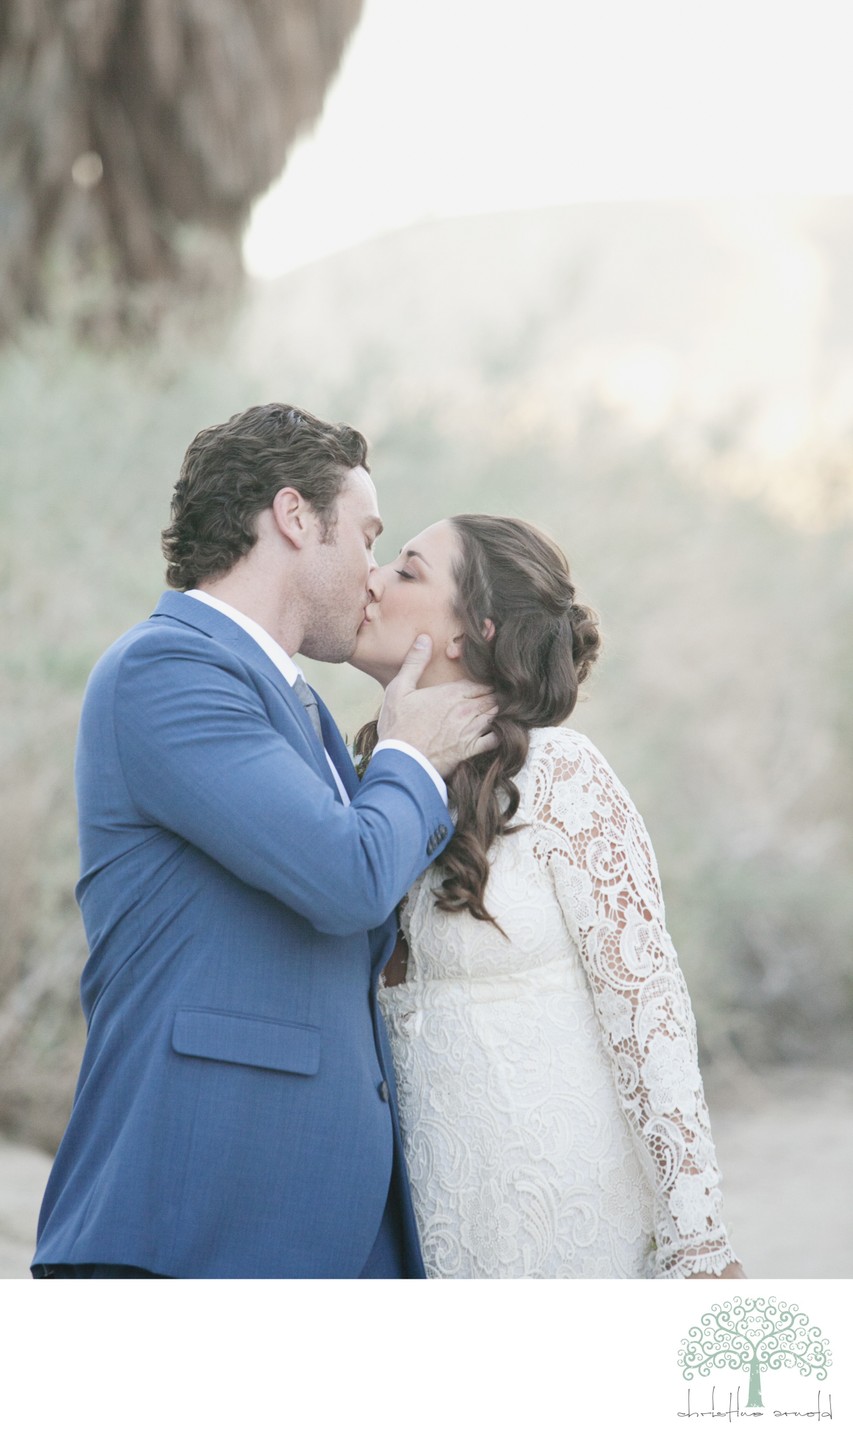 California National Park Weddings and Elopements